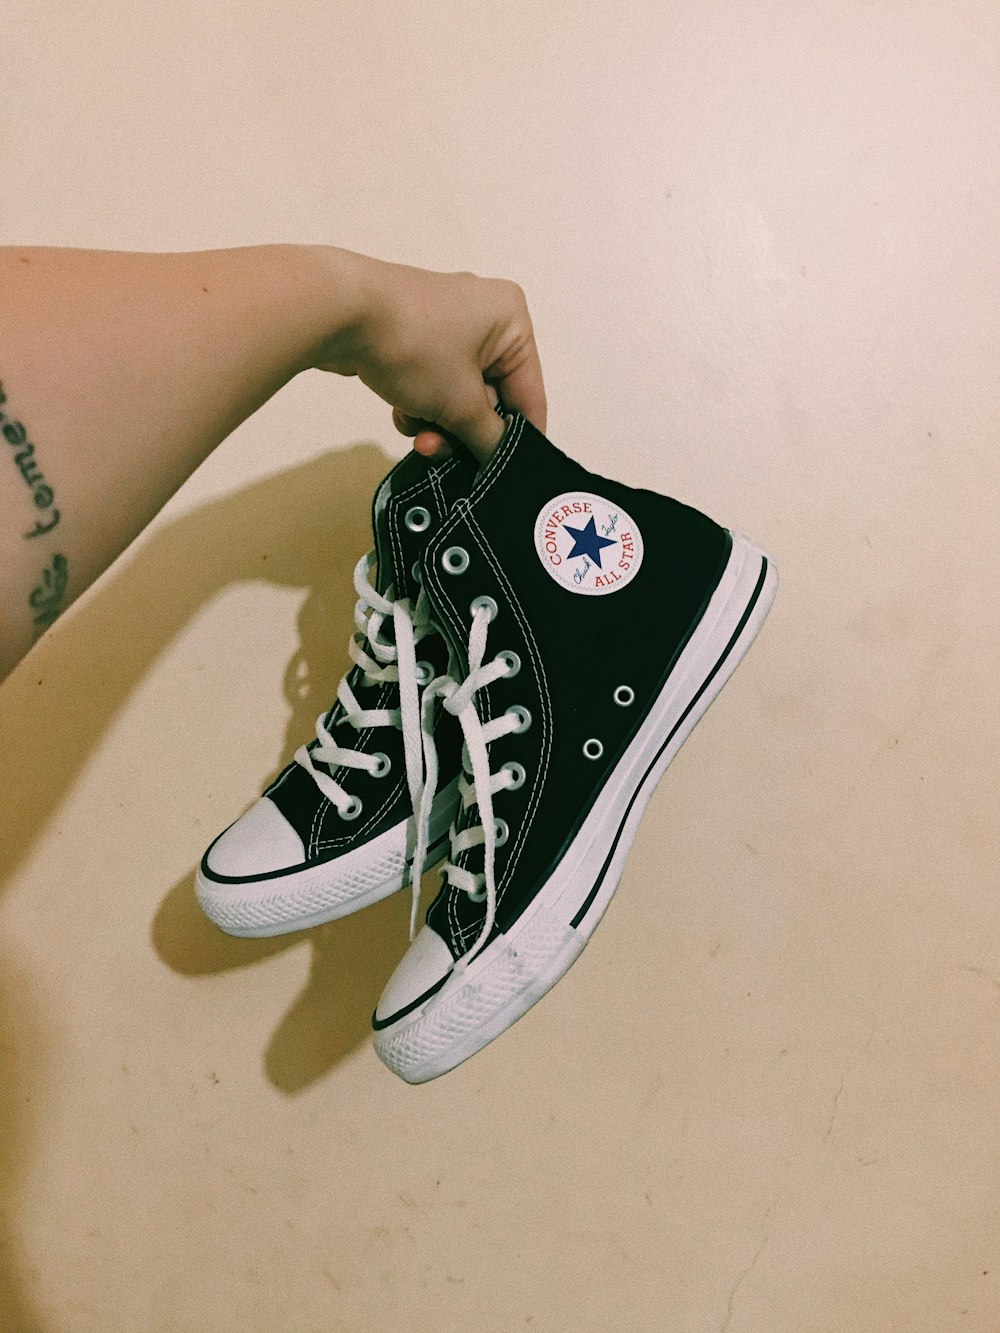 Person wearing black converse all star high top sneakers photo – Free  Allstar Image on Unsplash